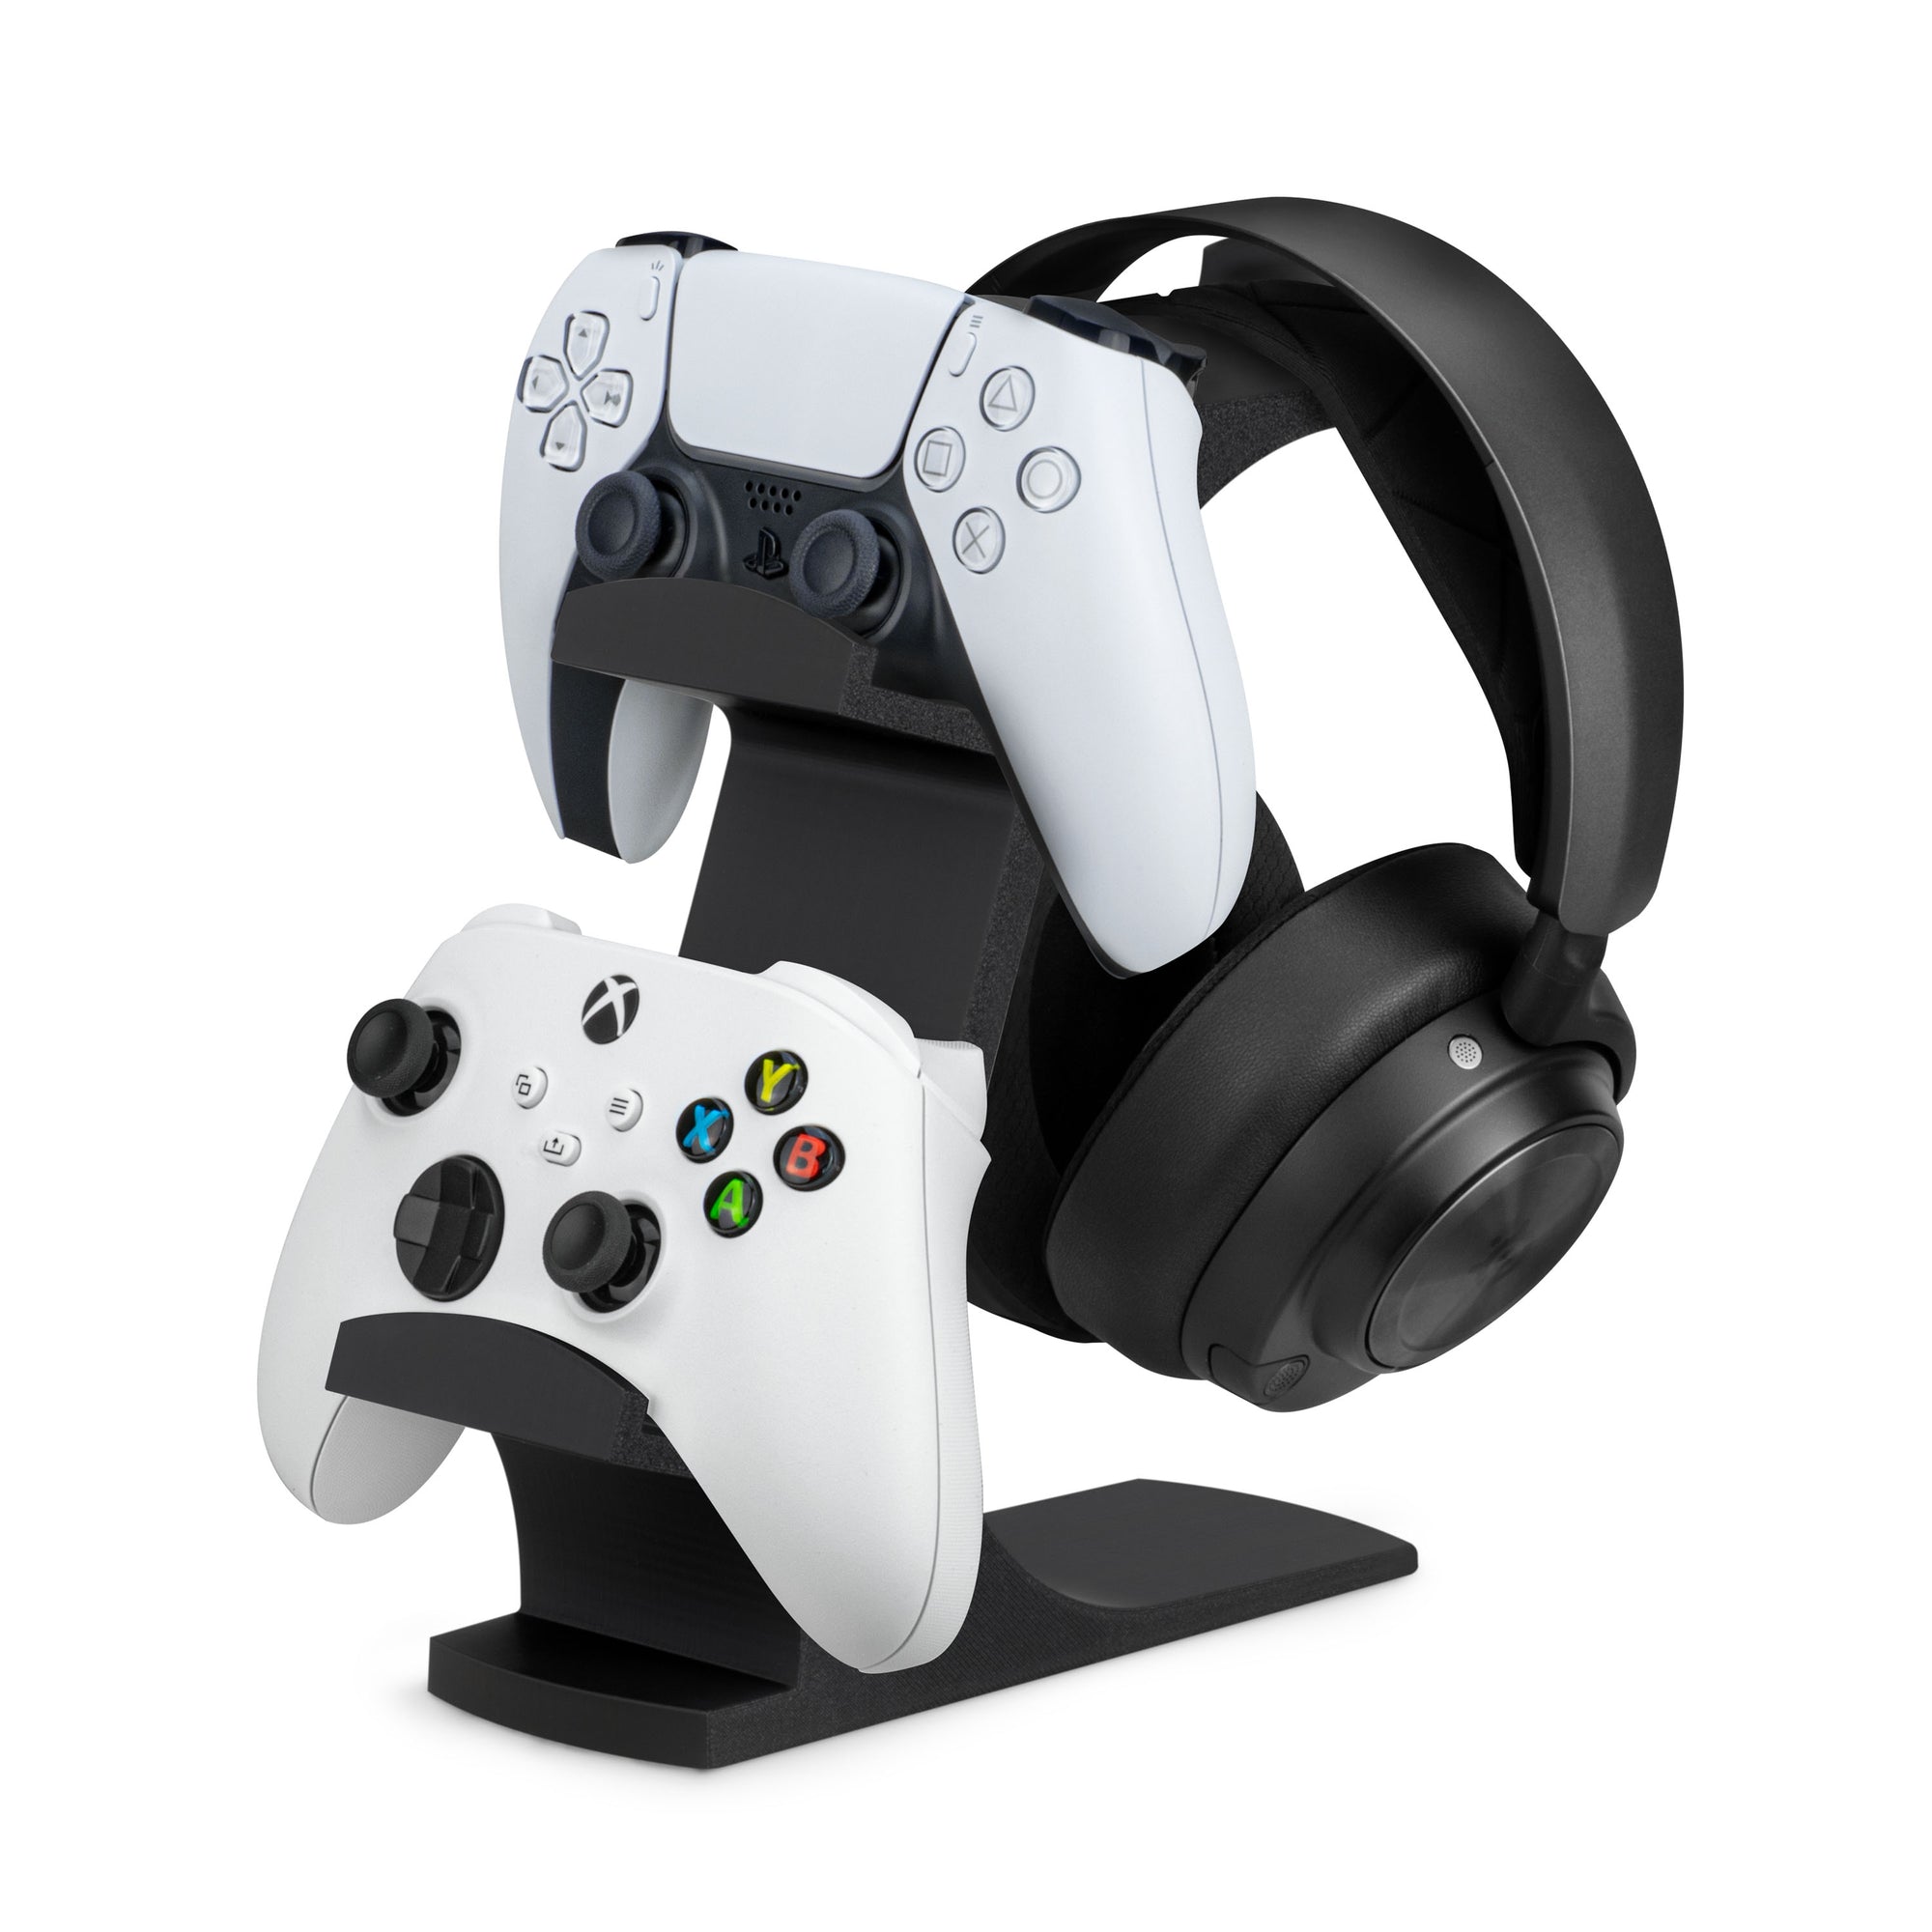 The Gravitas - Headphone Stand & Game Controller Holder for Desks - Universal Design for All Types Of Headsets & Gamepads